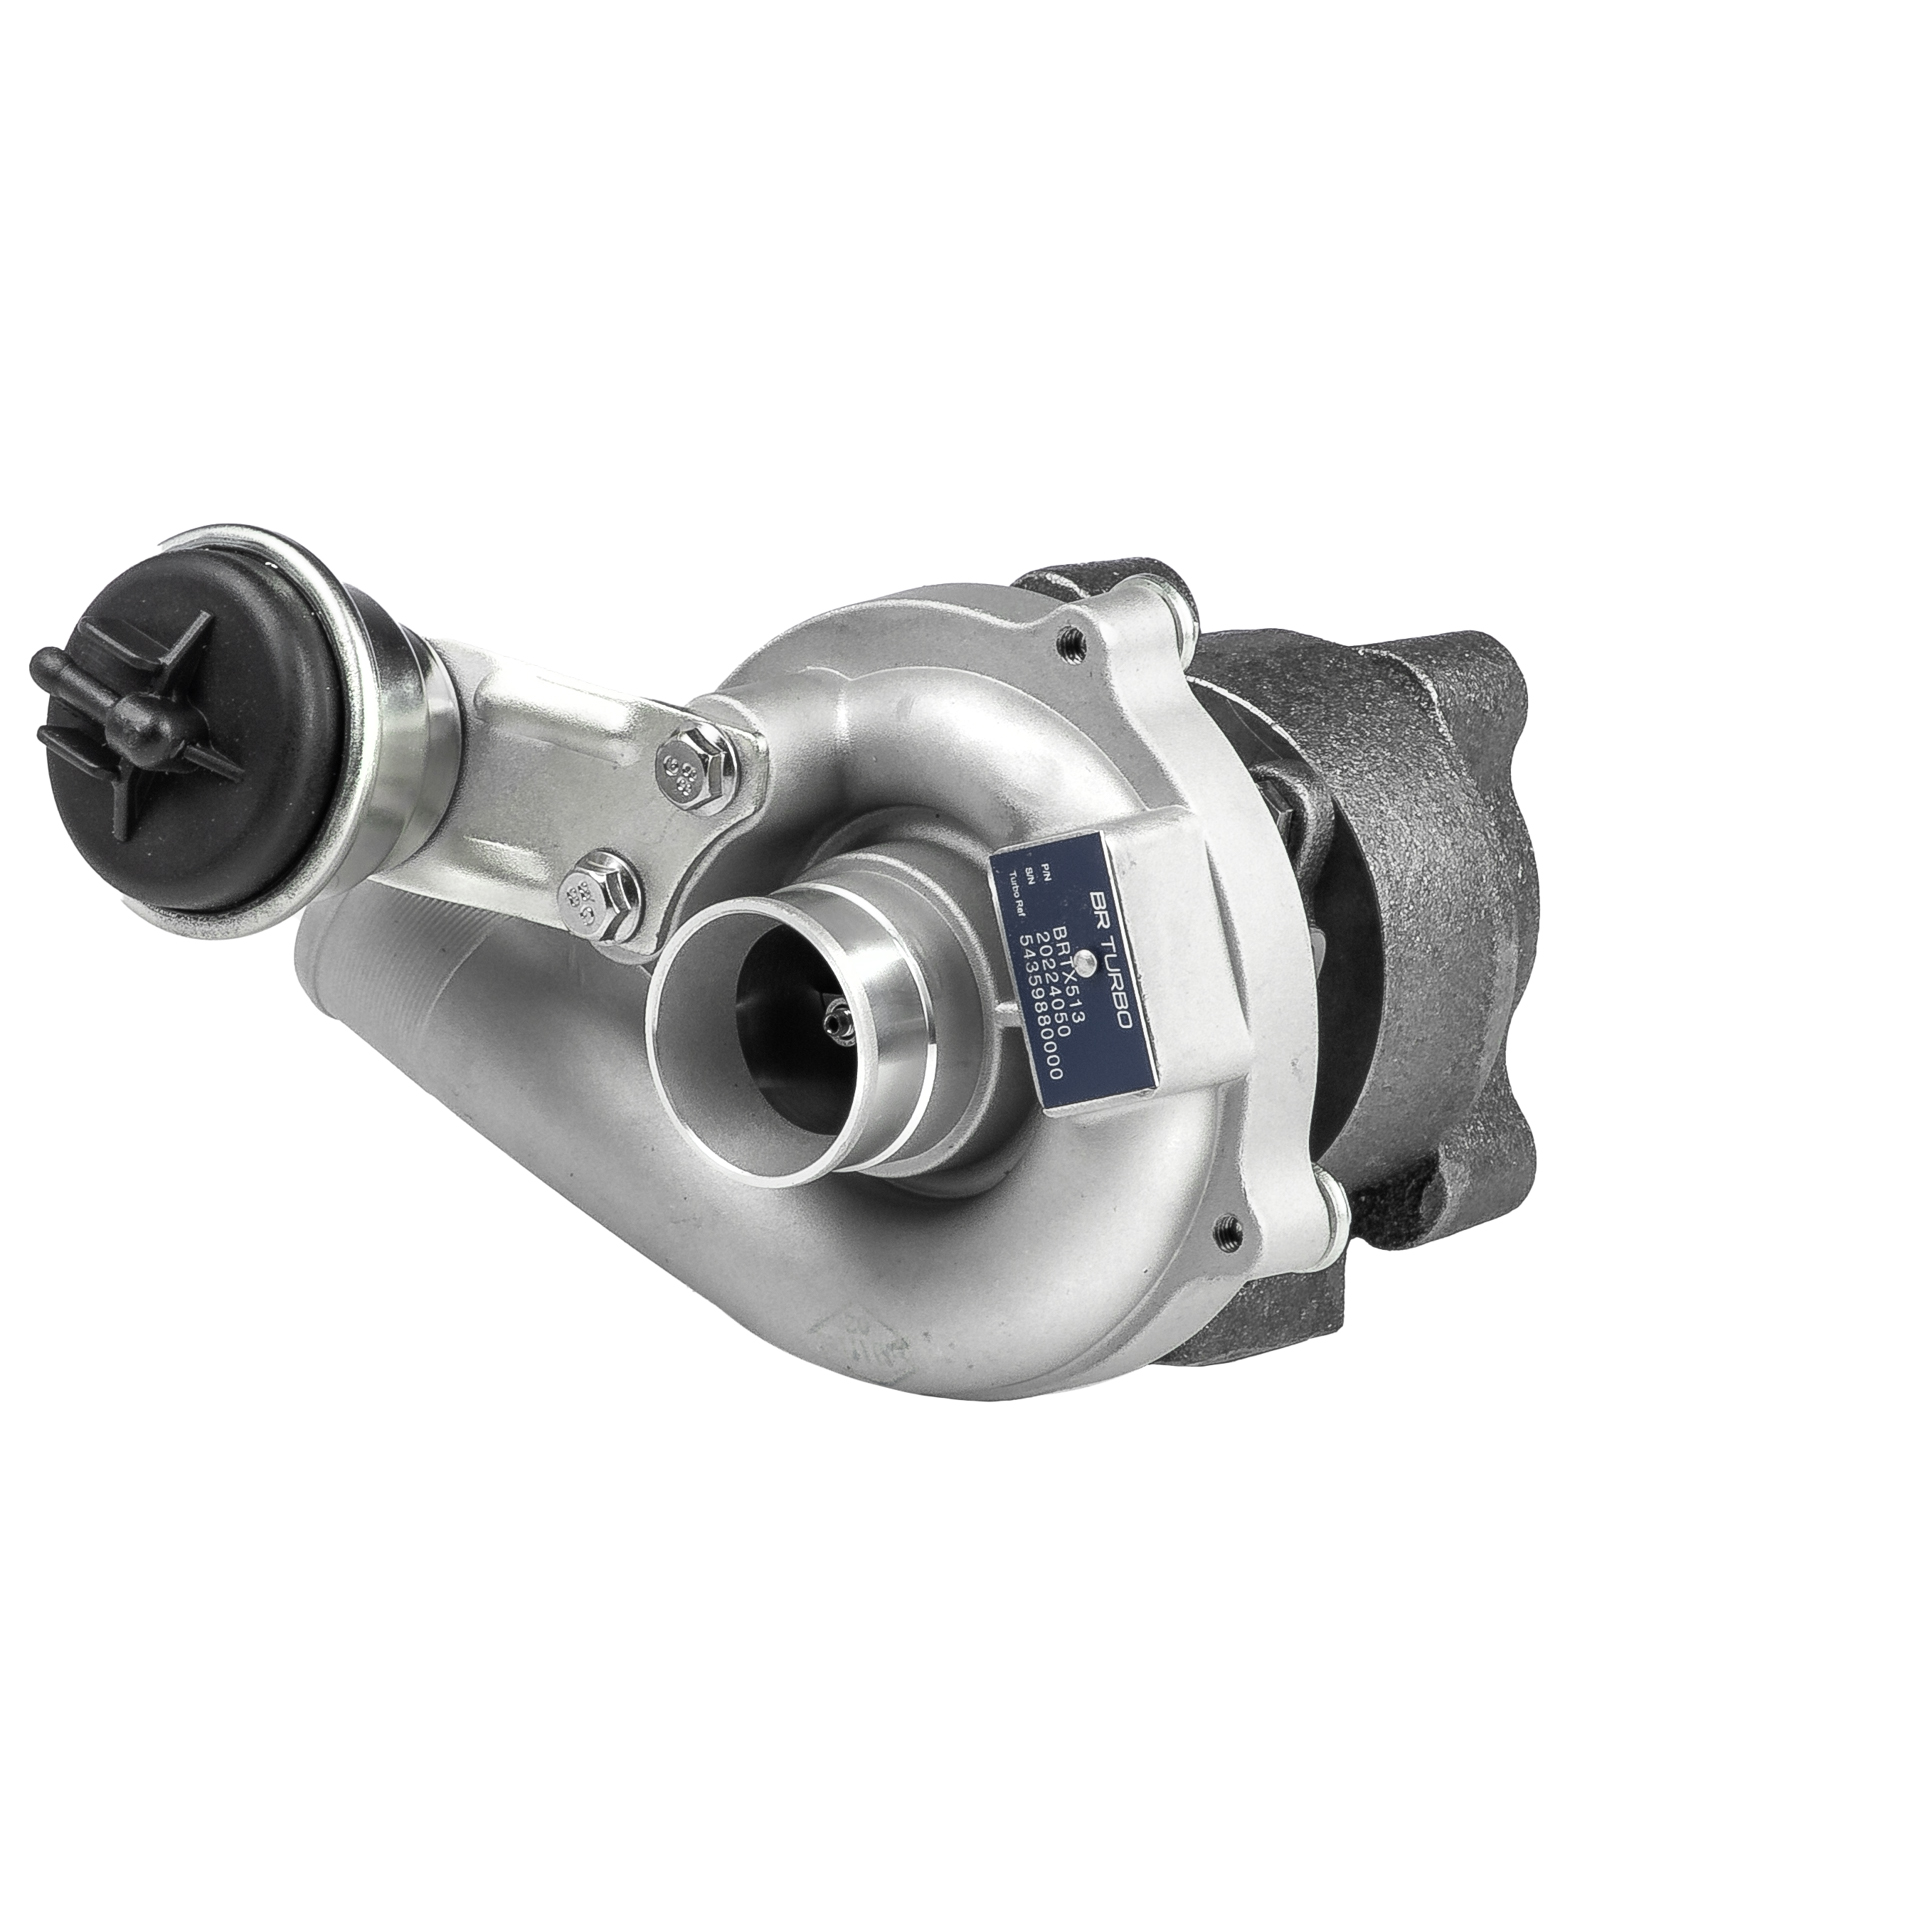 Nissan Turbocharger BR Turbo BRTX513 at a good price